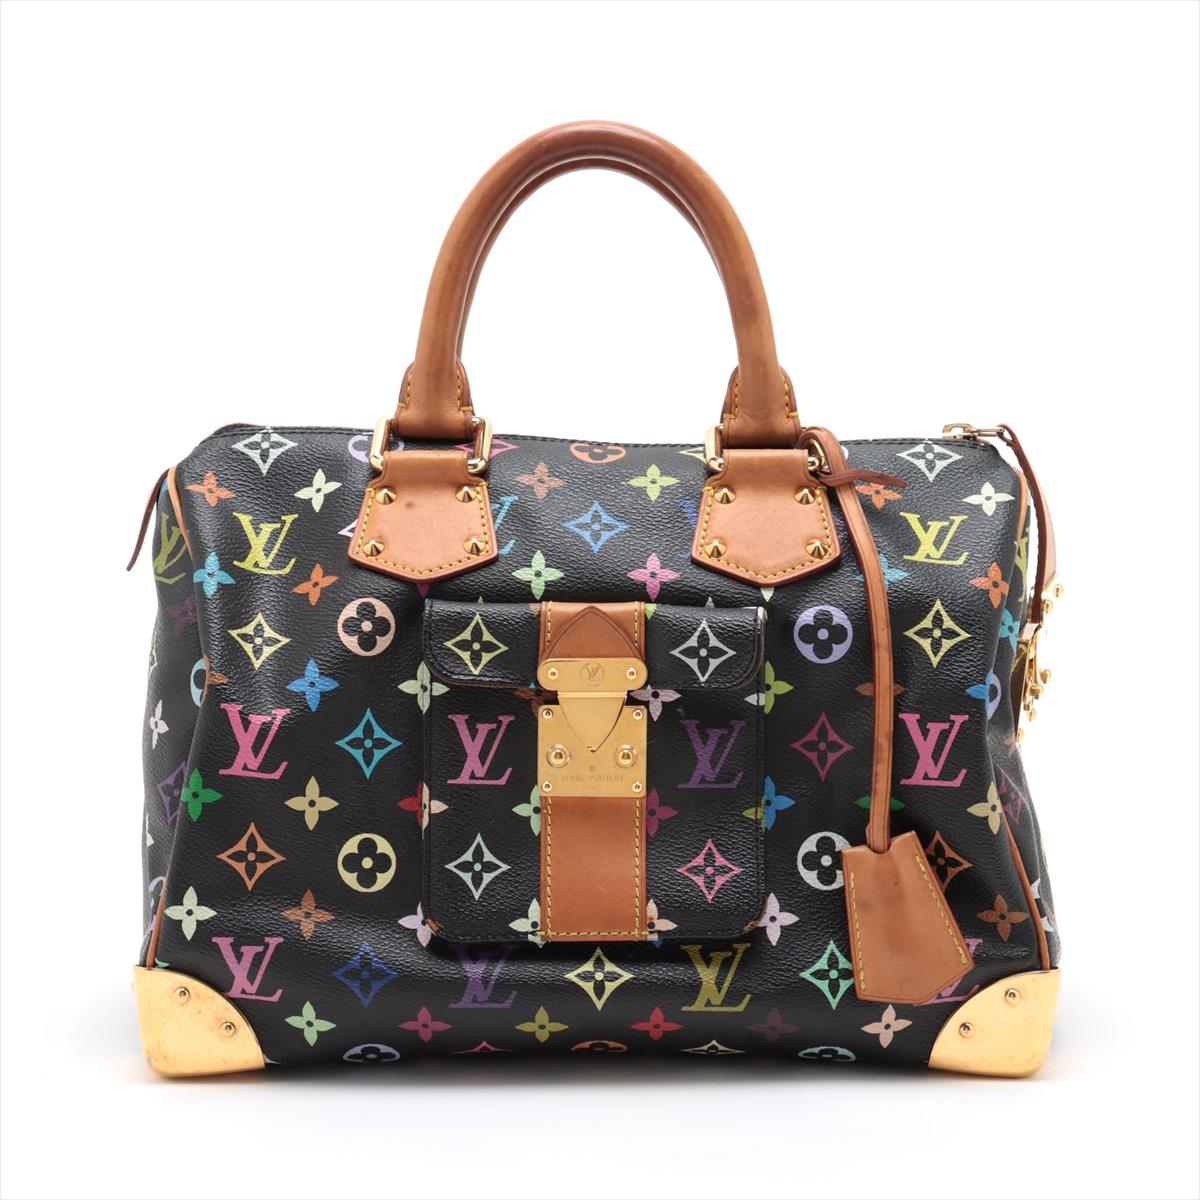 The Louis Vuitton Multicolor Speedy 30 is a vibrant and iconic handbag that seamlessly combines luxury and playful sophistication. The classic Speedy silhouette is reimagined with a burst of colors in the form of the signature LV Multicolor monogram